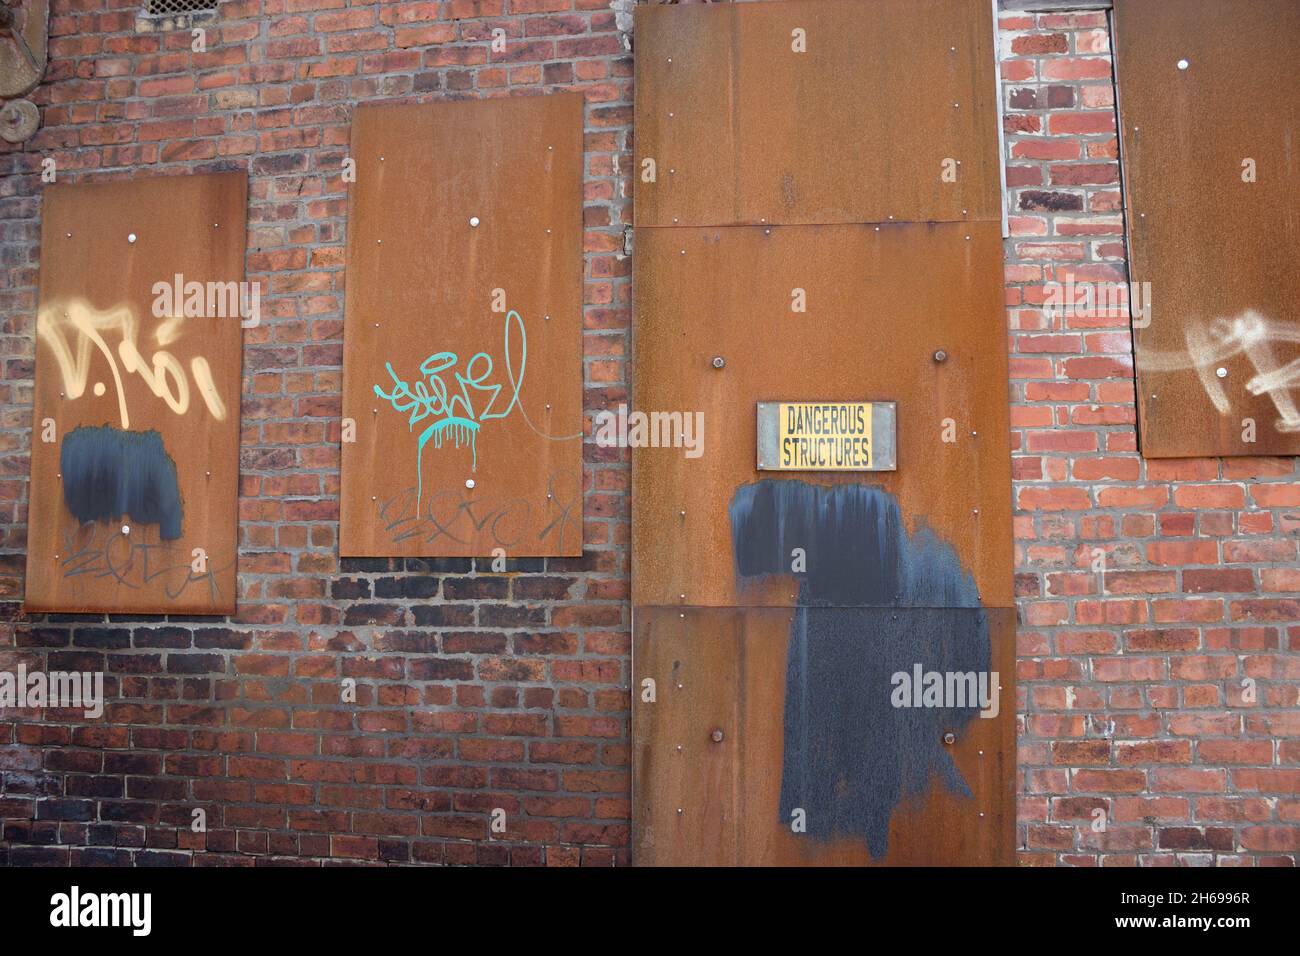 Abandoned Building, Derelict, Deserted, Sealed Off, Metal Boarded Up Windows, Rundown Urban Area, Brick Exterior In Ruins Unoccupied Location Graffiti Stock Photo